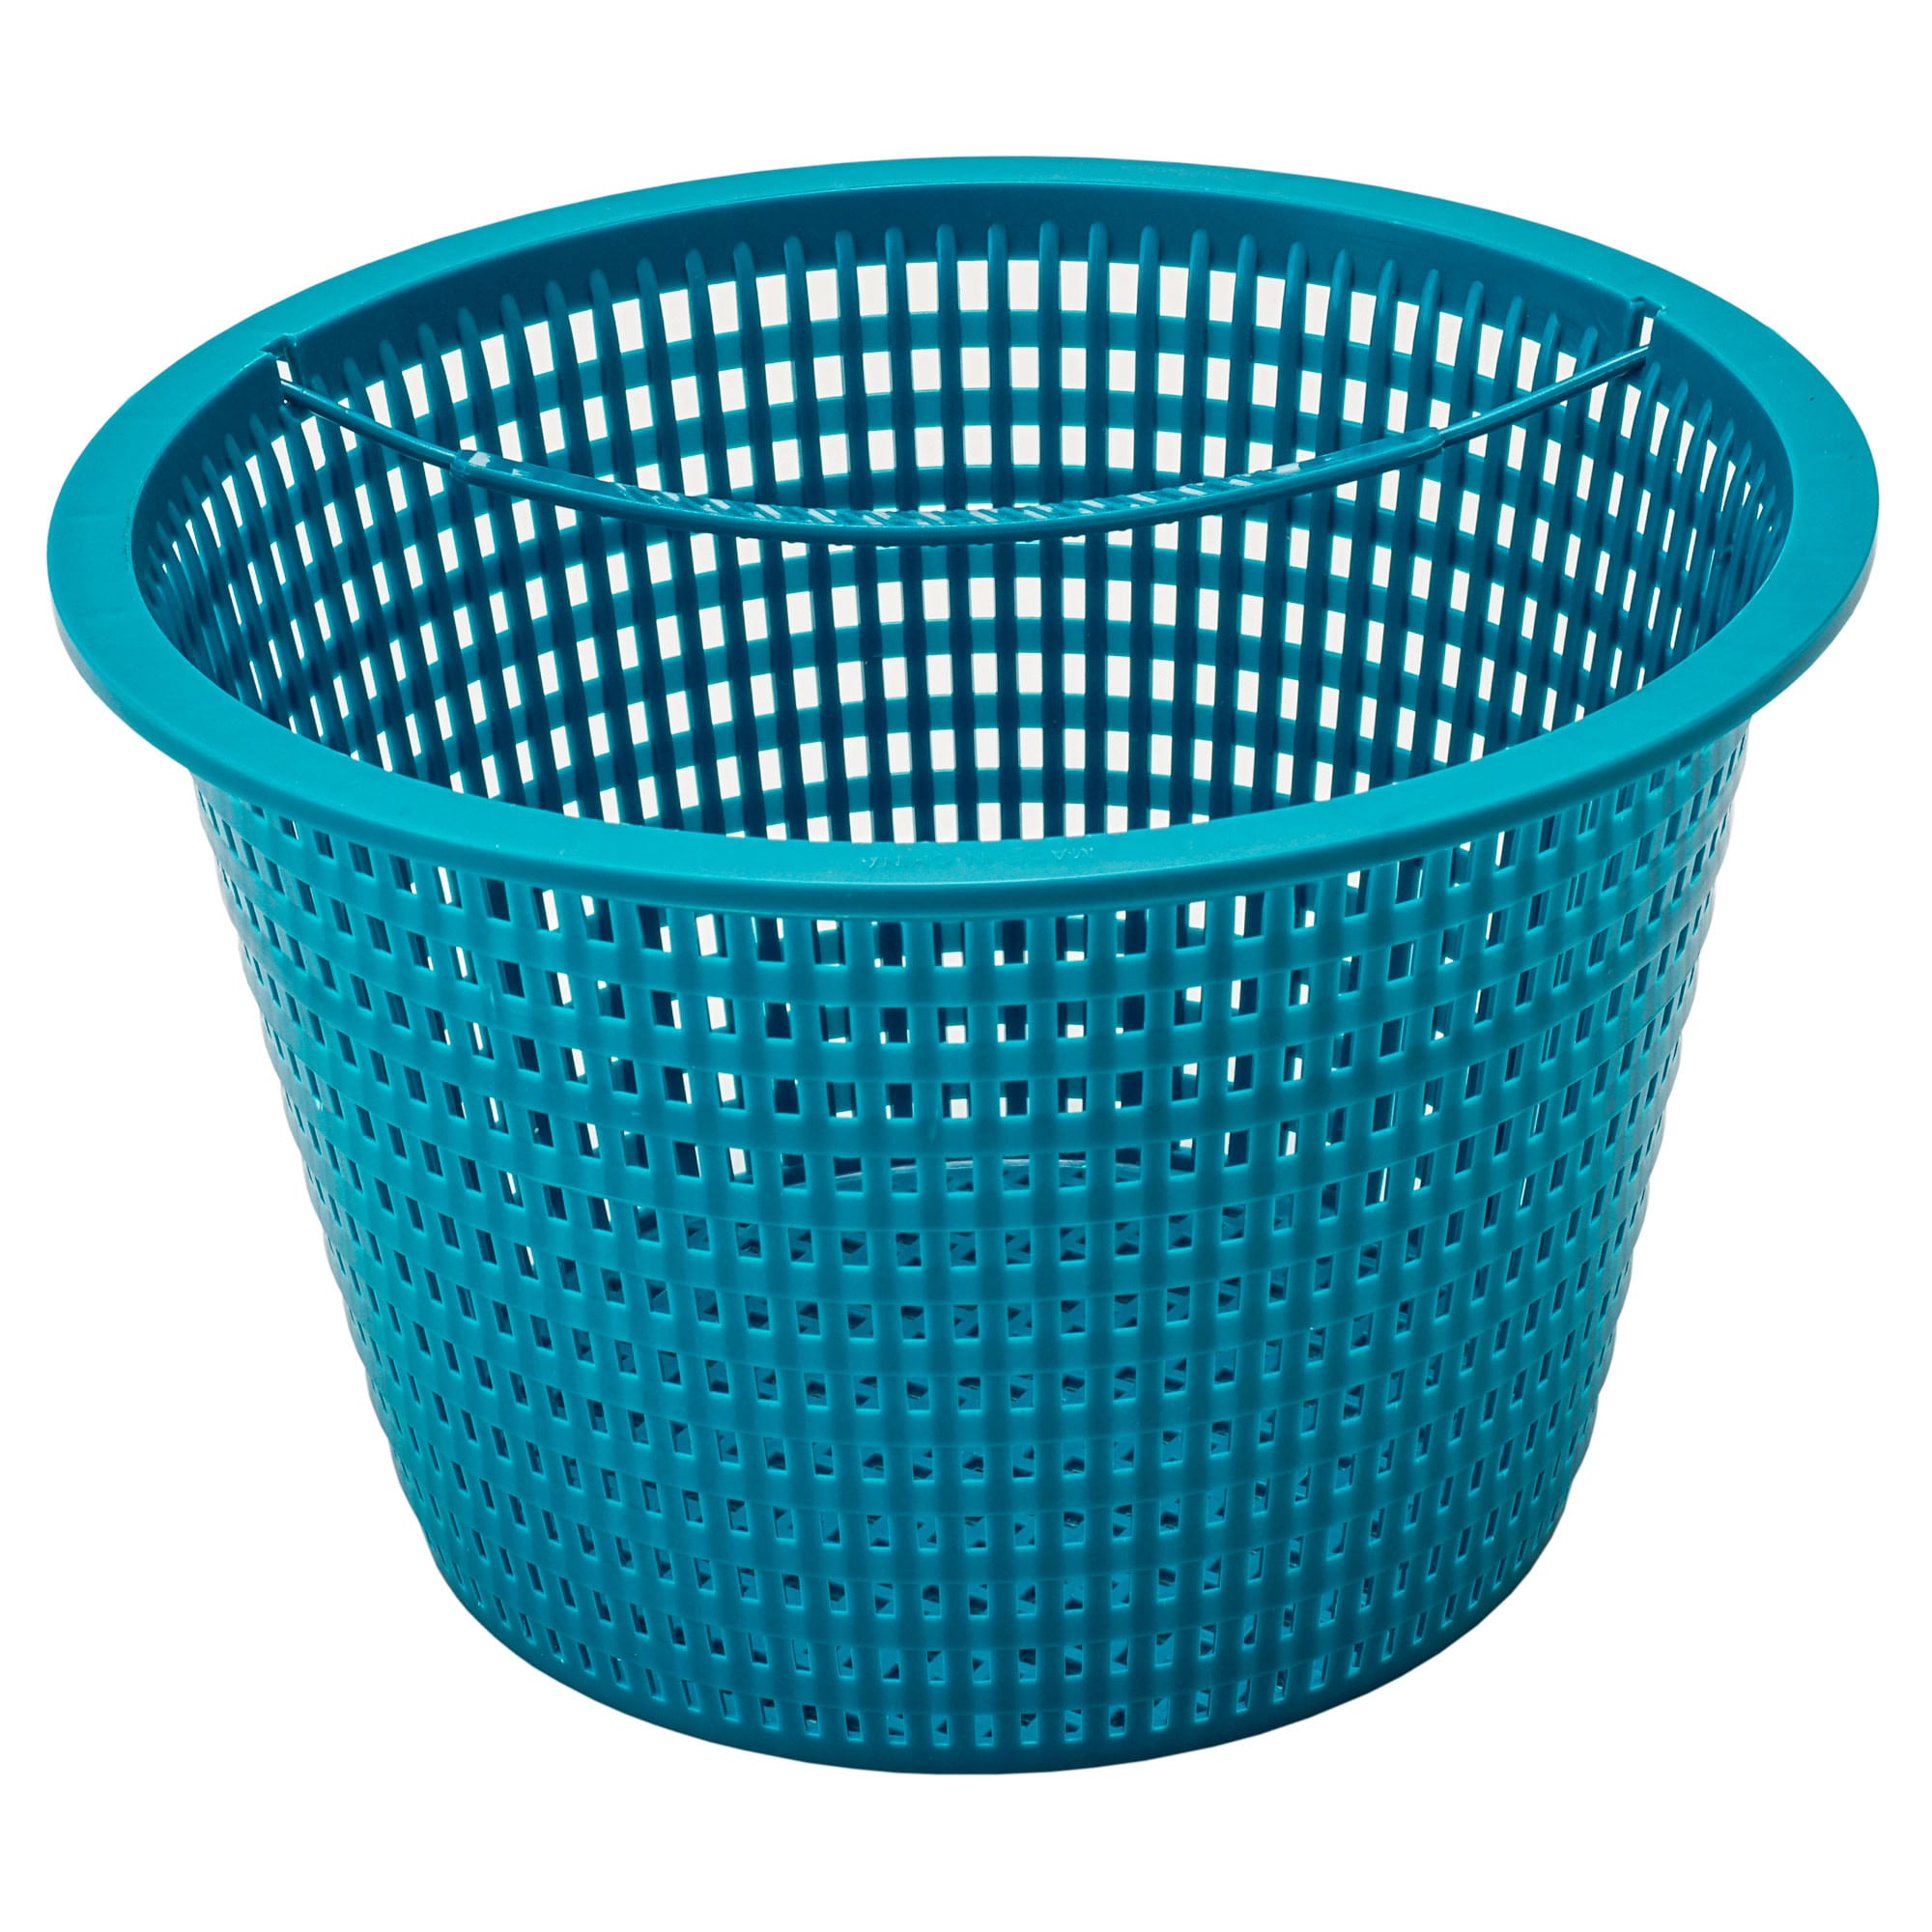  U.S. Pool Supply Swimming Pool Teal Blue Plastic Skimmer  Replacement Basket (Set of 2) - Skim Remove Leaves and Debris - 8 Top,  5.5 Bottom, 5 Deep - Not Weighted 